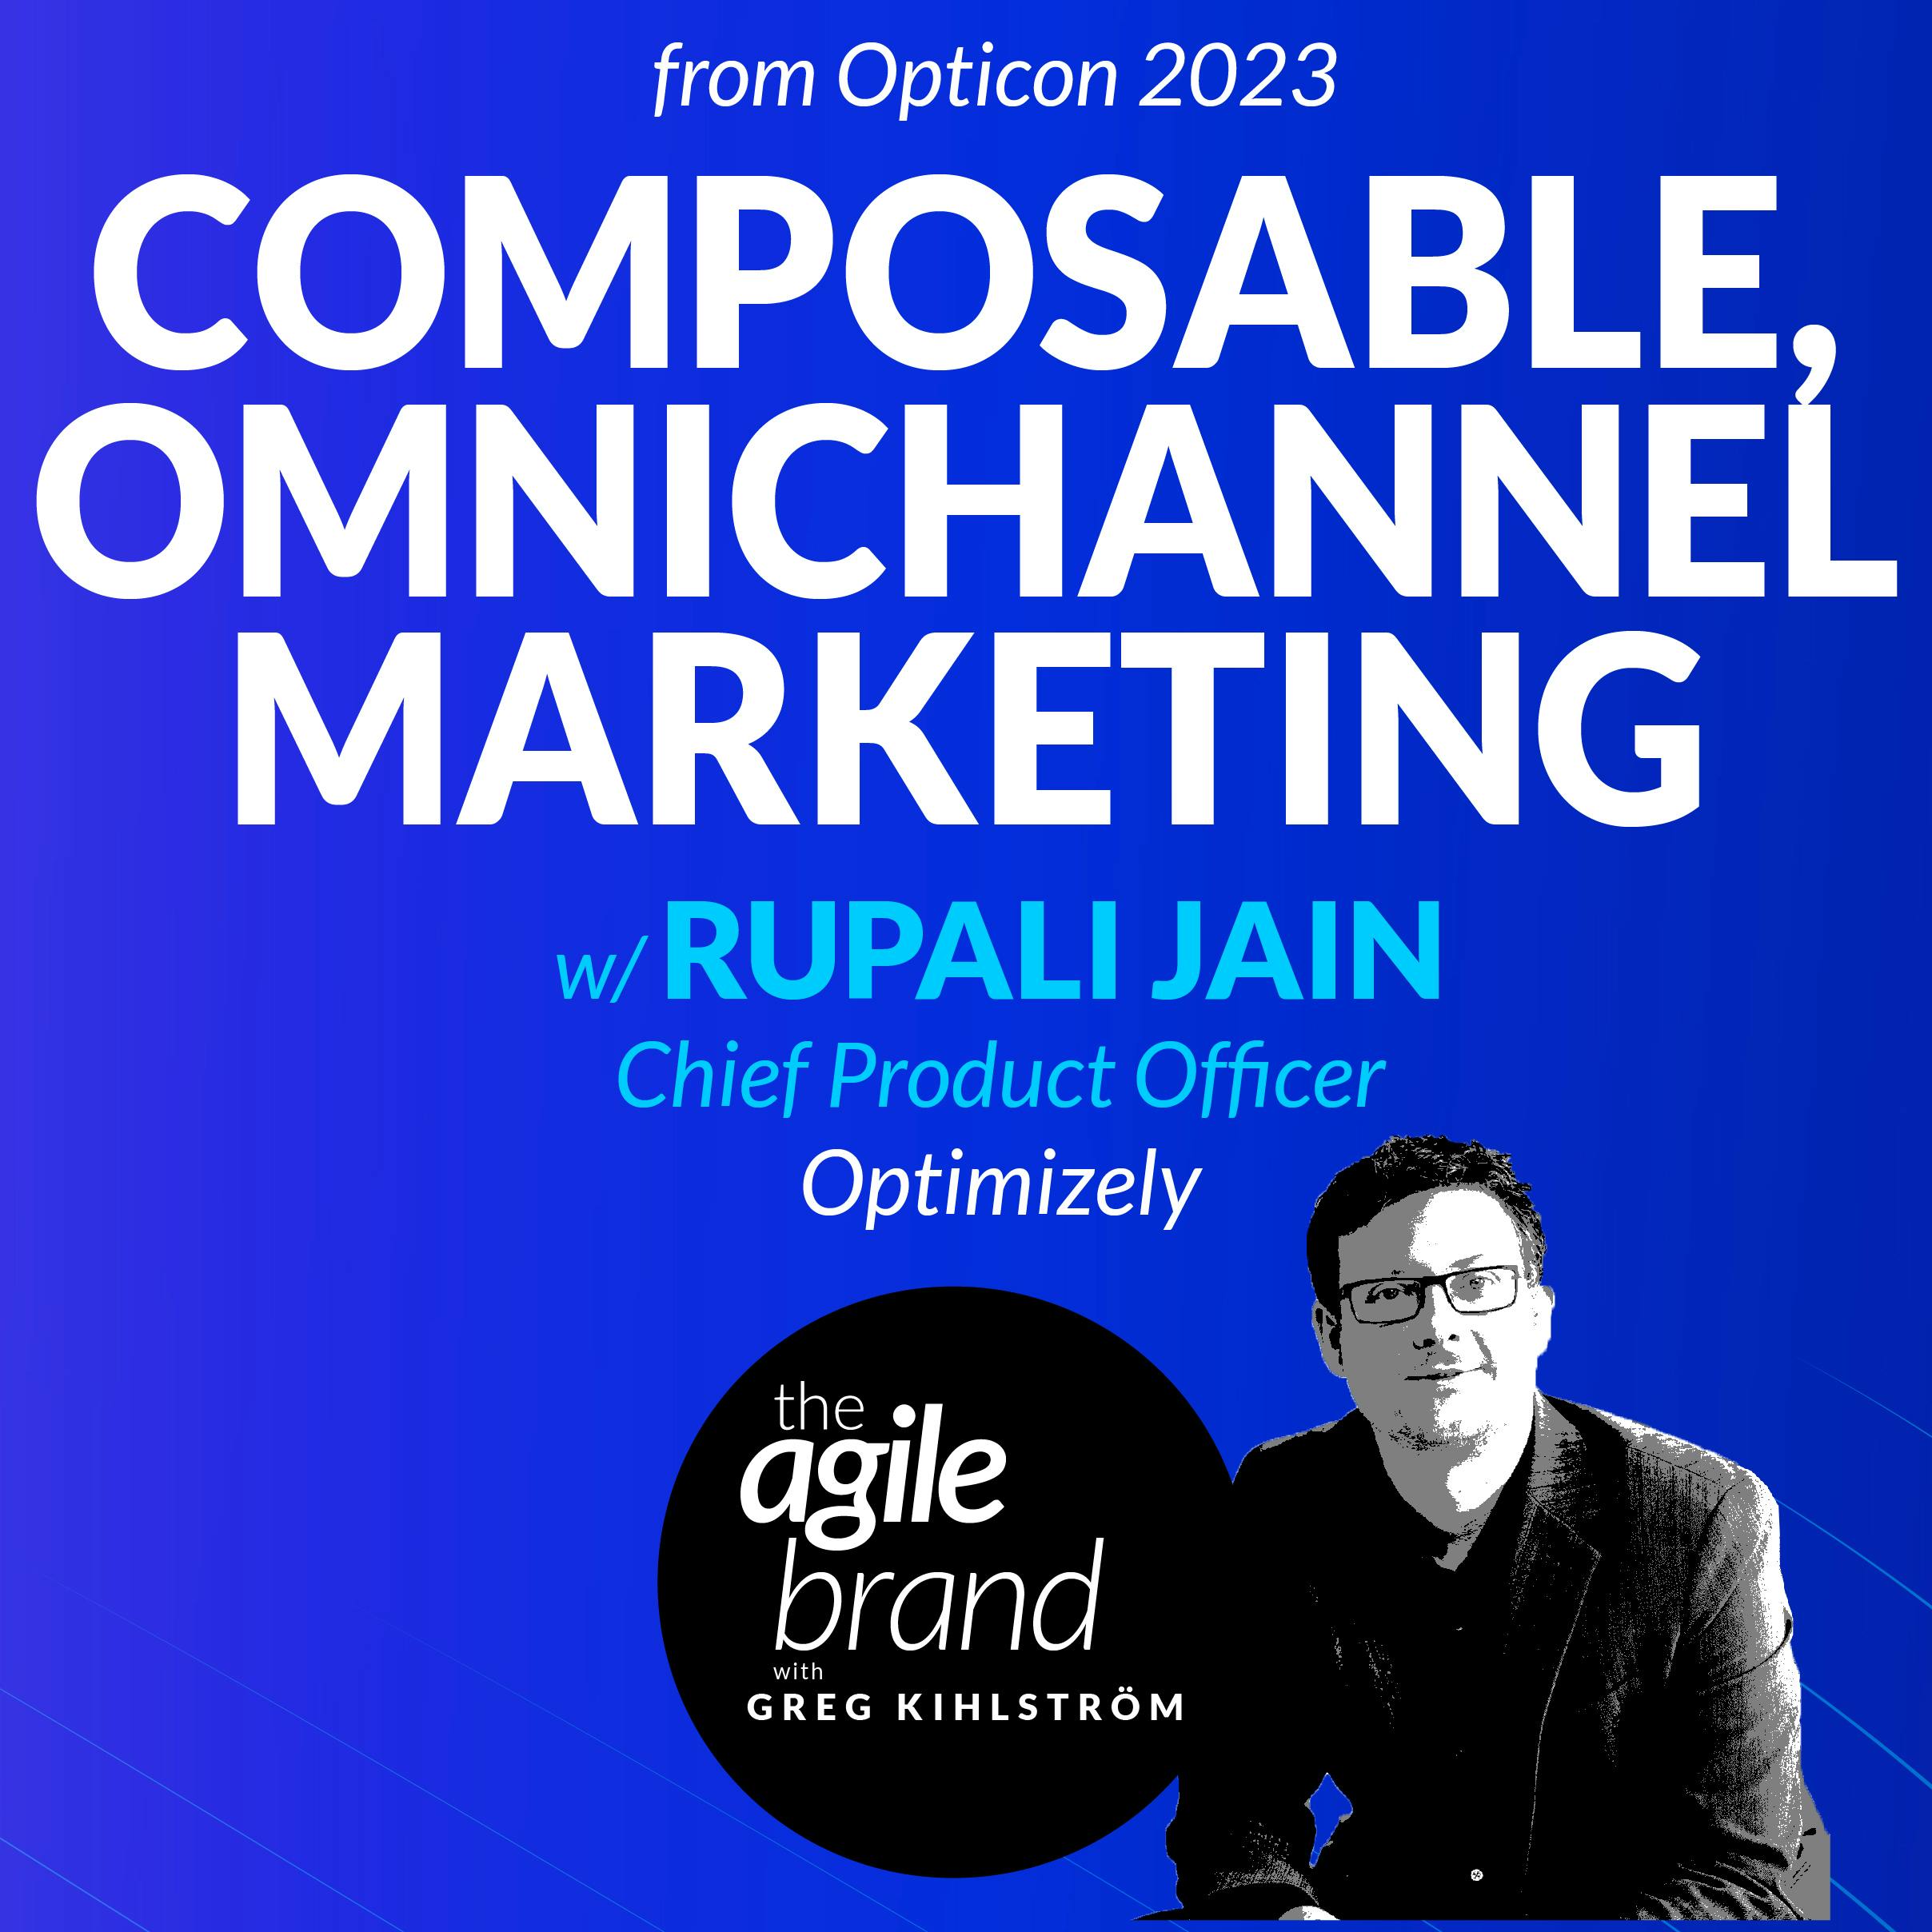 #434: Composable, omnichannel marketing with Rupali Jain, Chief Product Officer, Optimizely